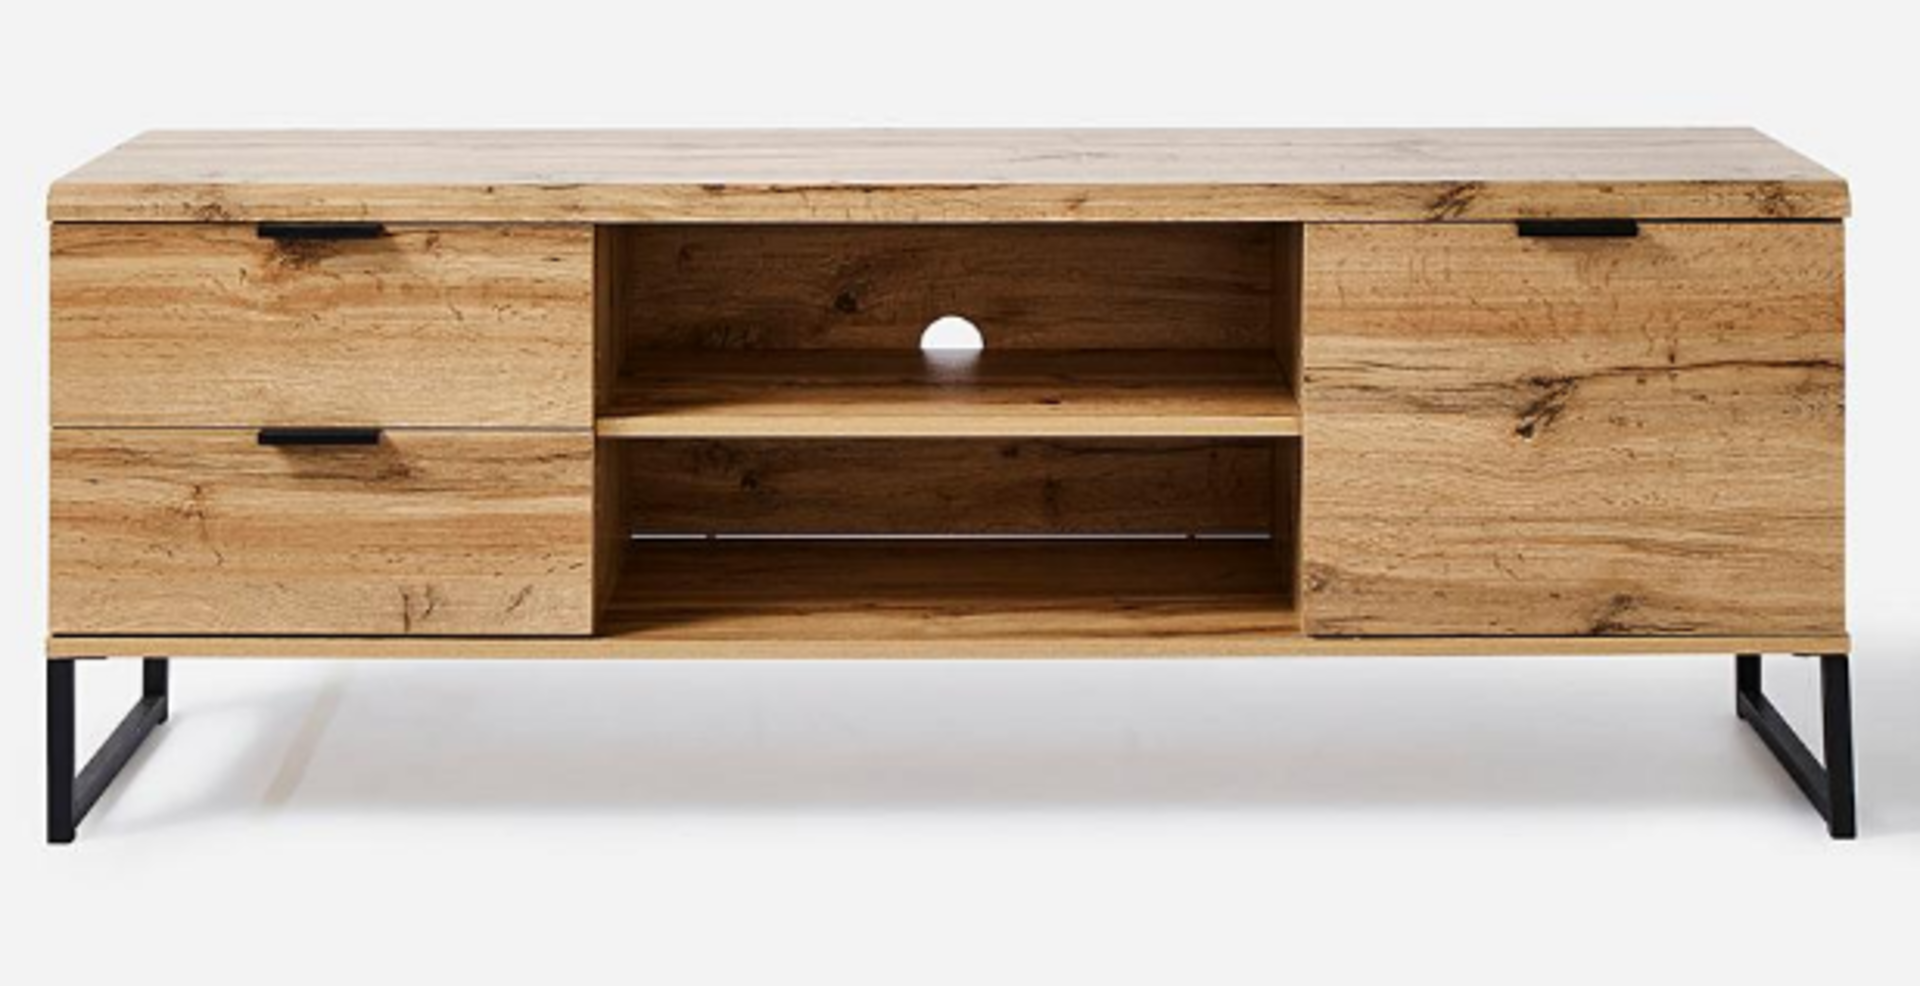 Shoreditch Wide TV Unit (SR4)The Shoreditch Range is a contemporary and minimalist design, perfectly